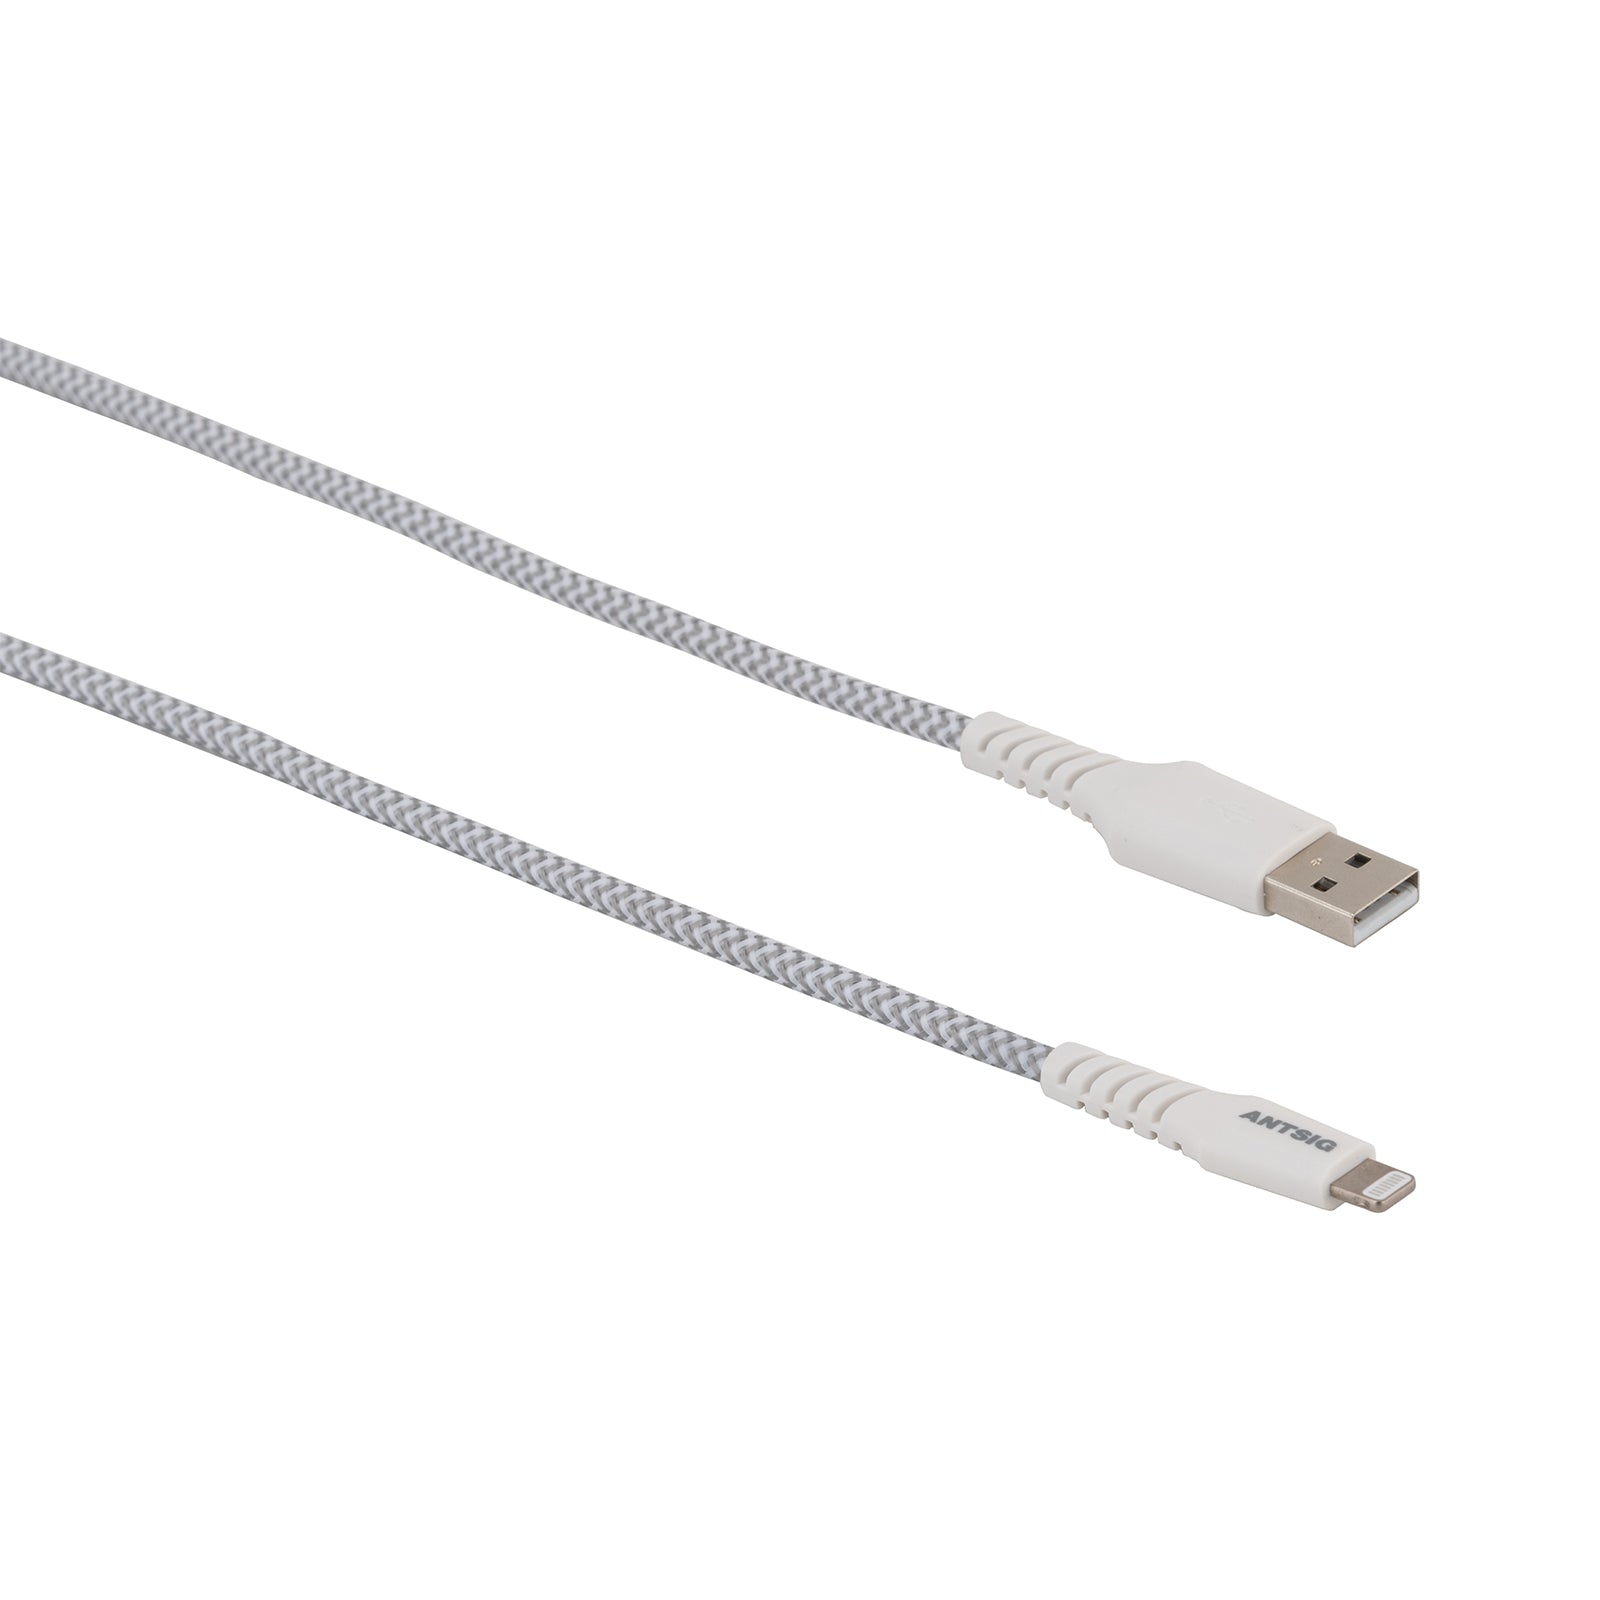 2m Braided Lightning to USB-A Cable